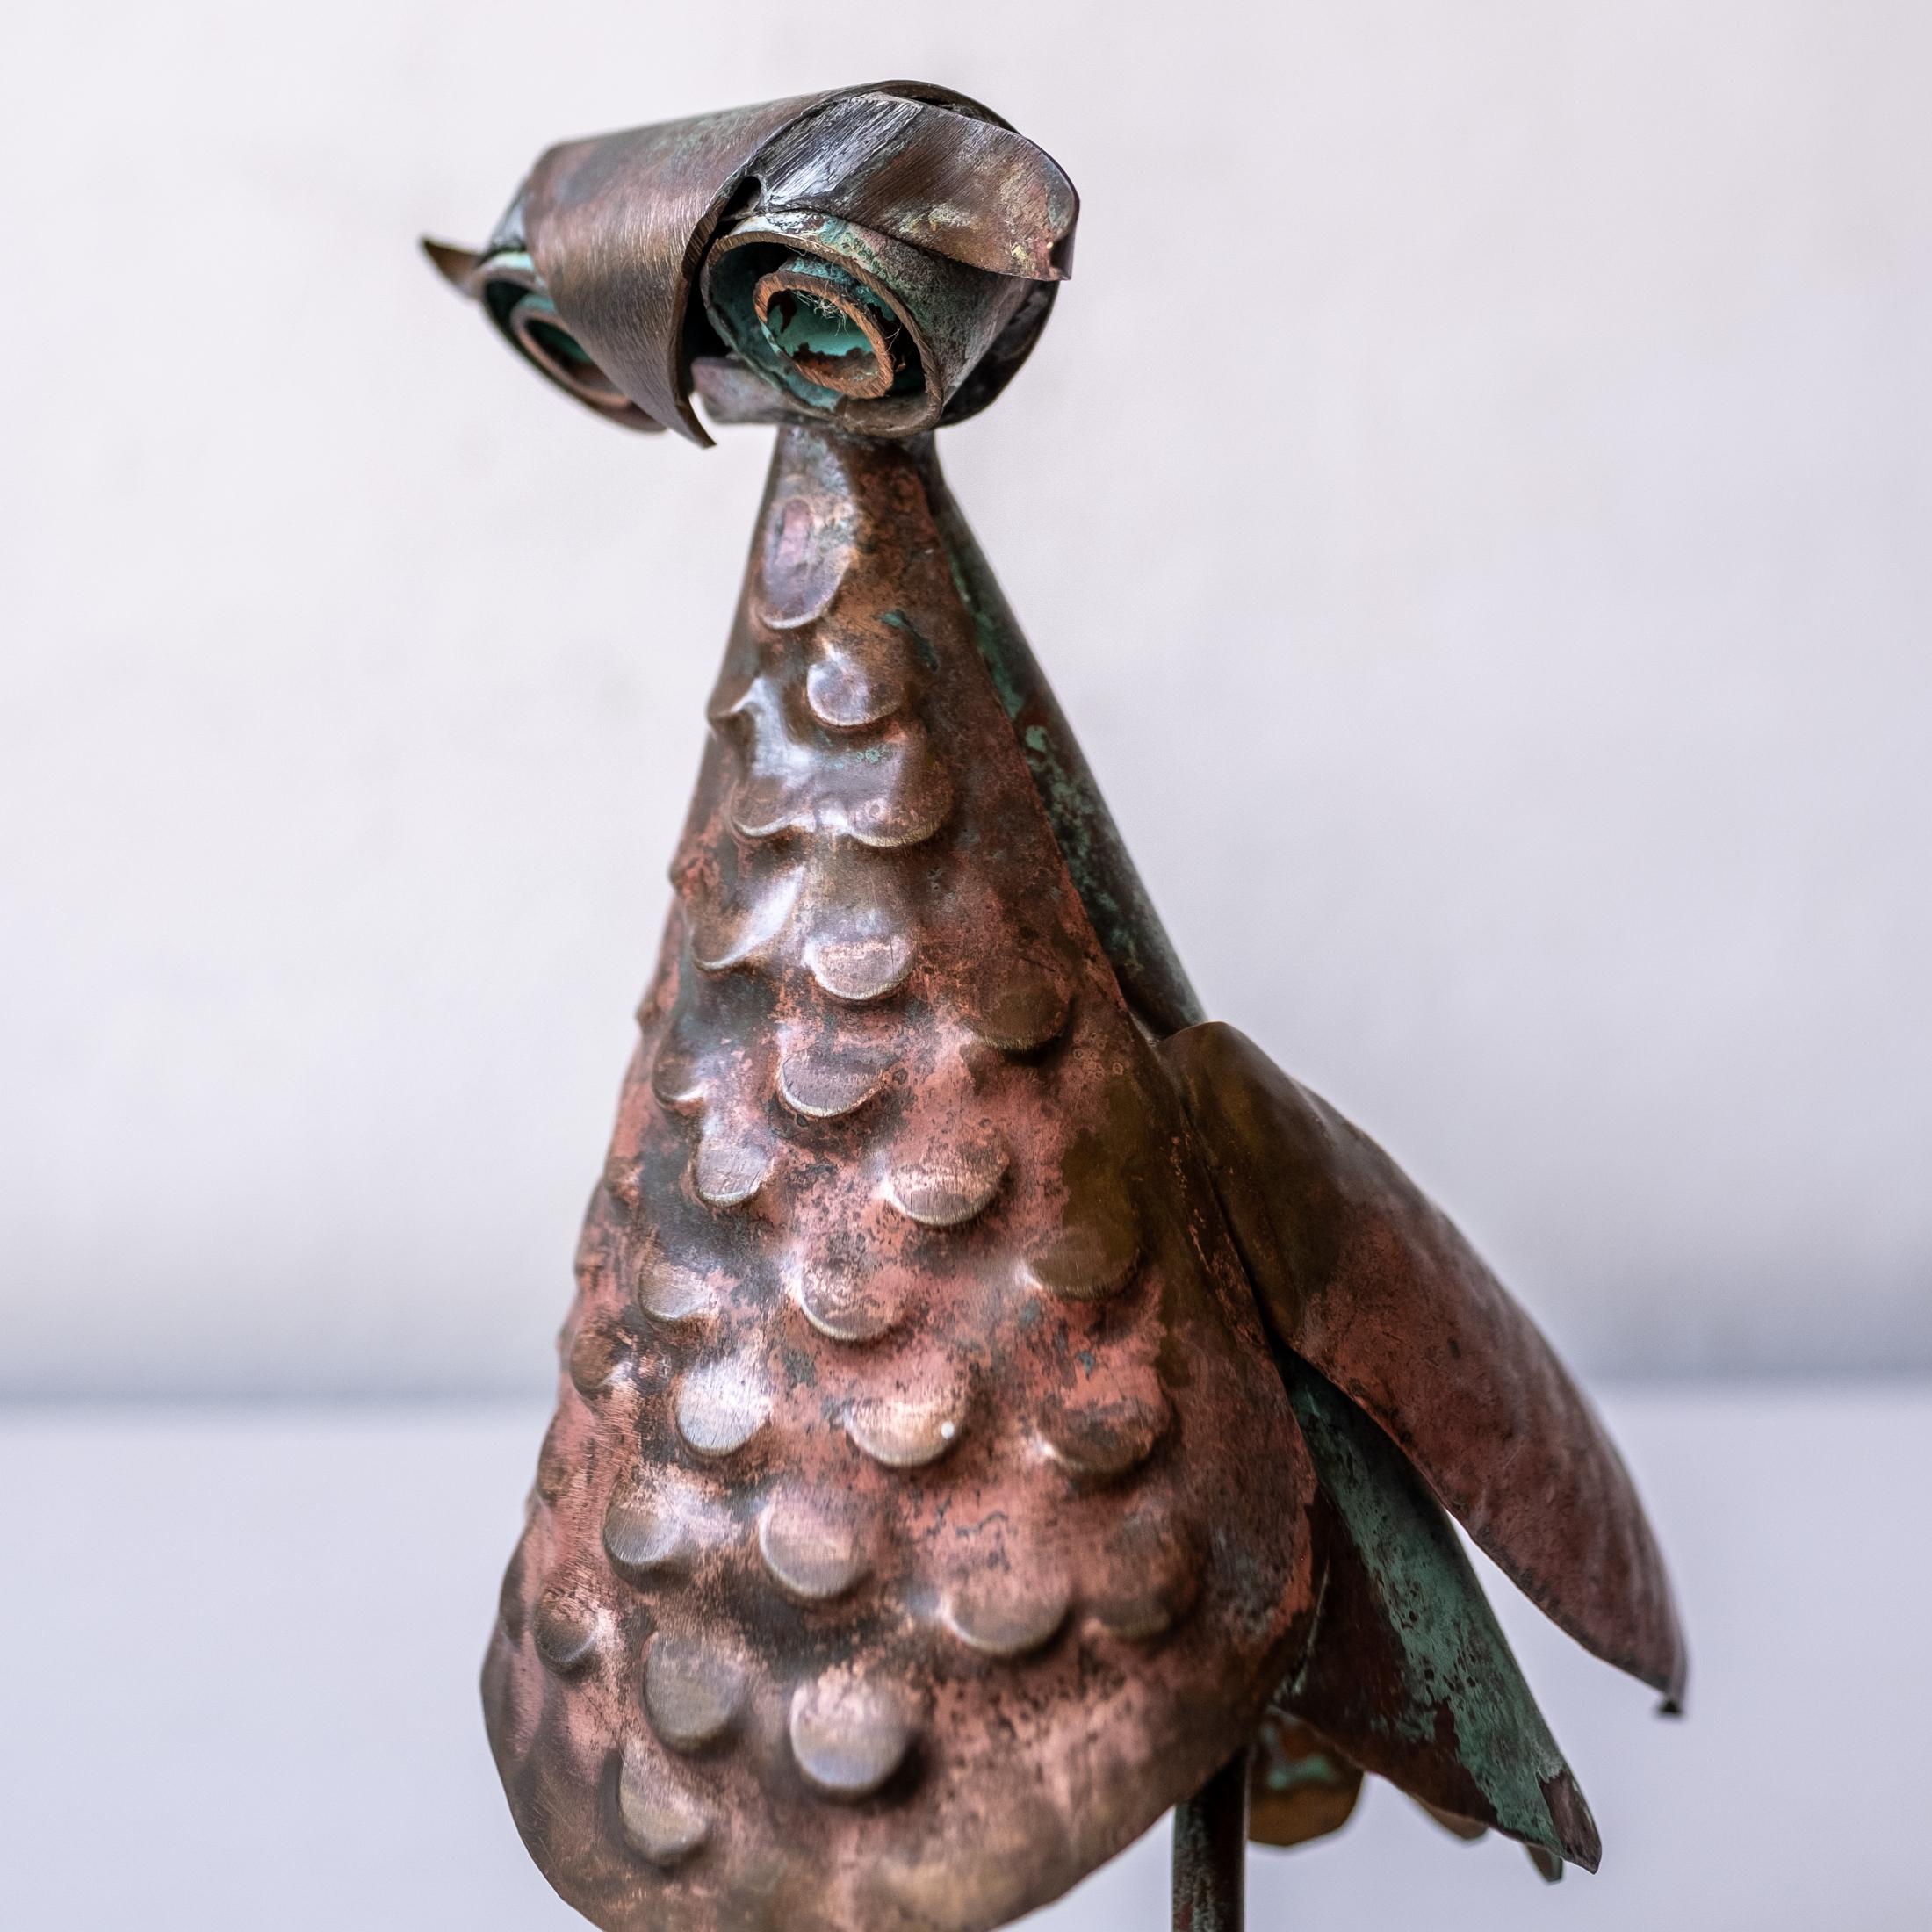 Antonio Castillo Mexican Modernist hand hammered and oxidized copper owl sculpture. A similar work by Antonio is pictured on the cover of 1966 issue of Artes de Mexico. The magazine is included with the sculpture.

Antonio was one of William